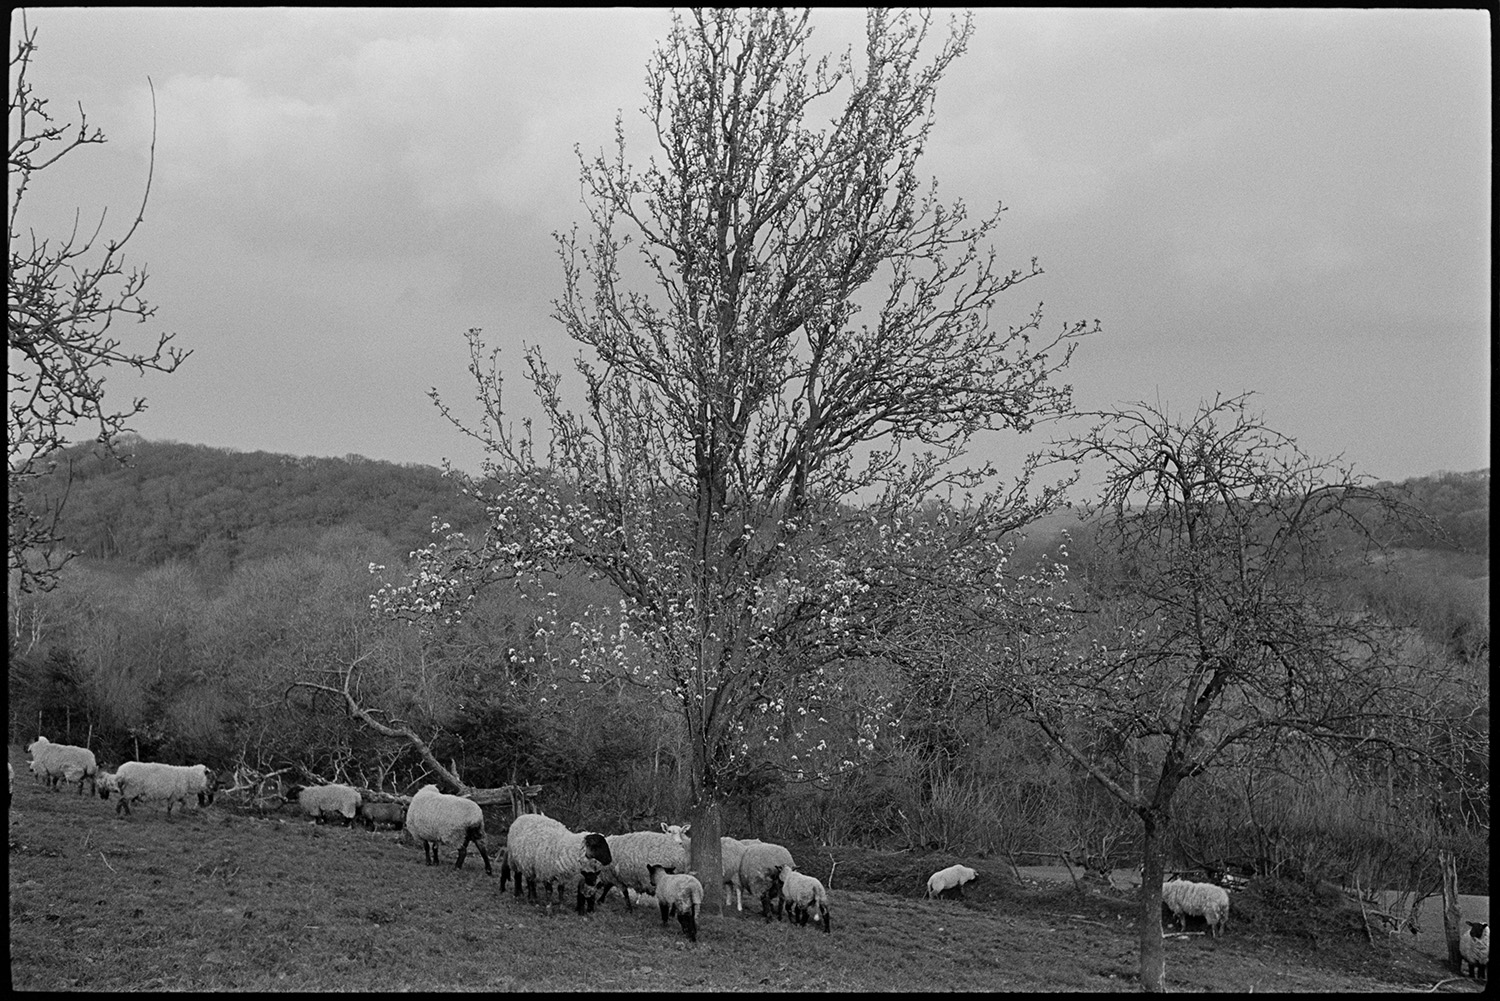 Orchards. Sheep in farm orchard.
[A flock of sheep with lambs grazing in an orchard at Sydham, Chulmleigh. The tree in the foreground is in blossom.]